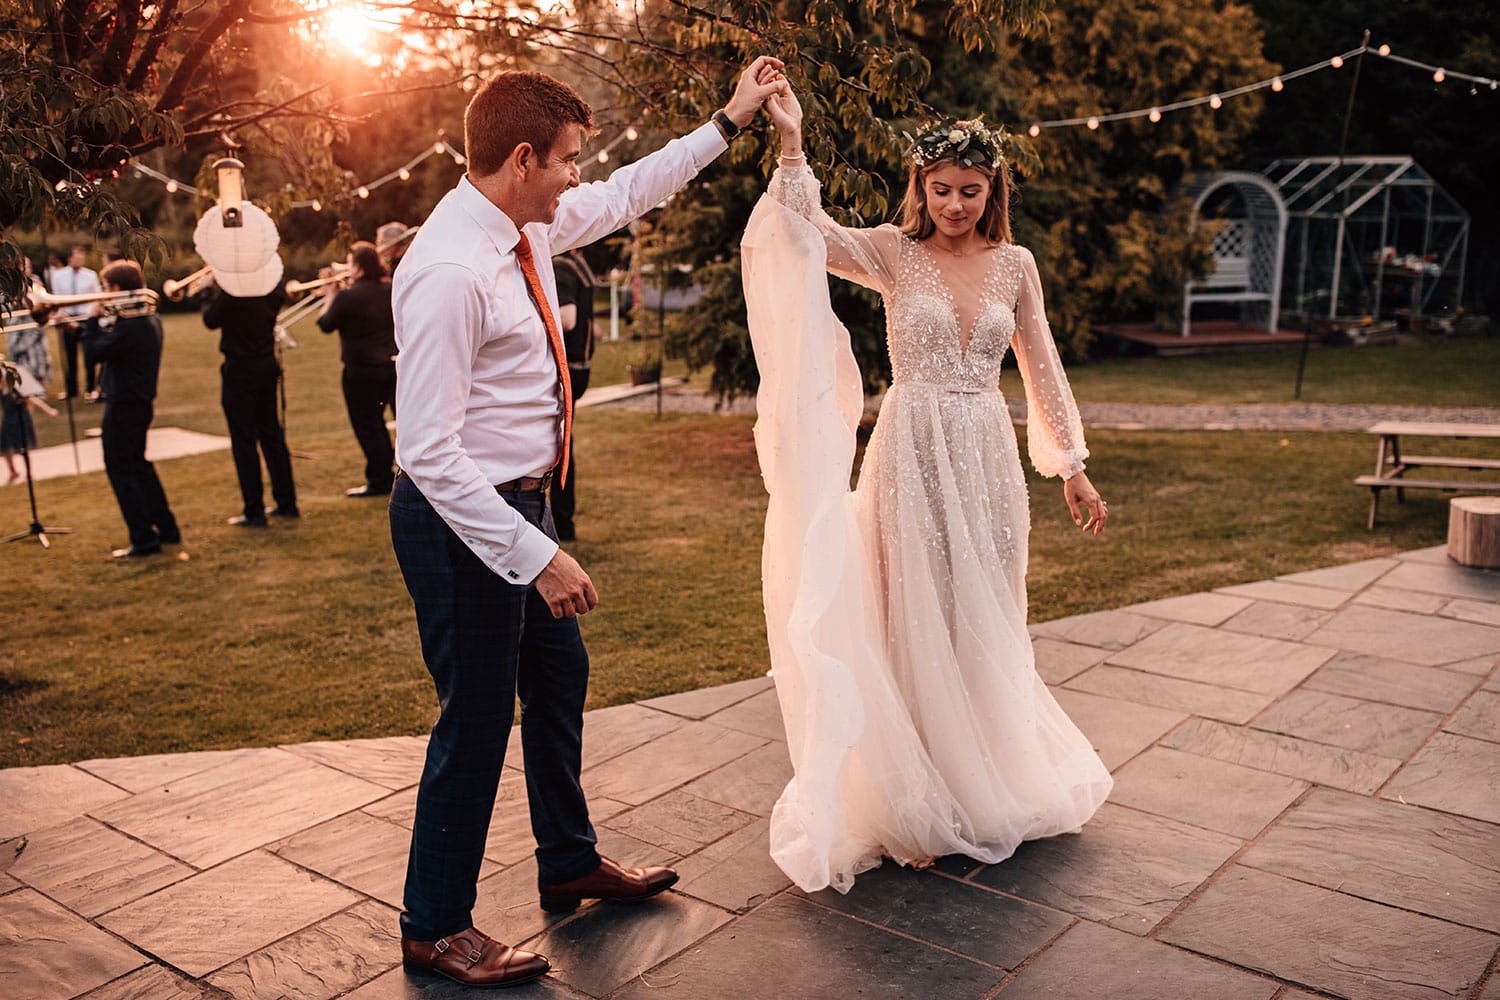 Bride and Groom dancing as the sunset behind them during their outdoor first dance